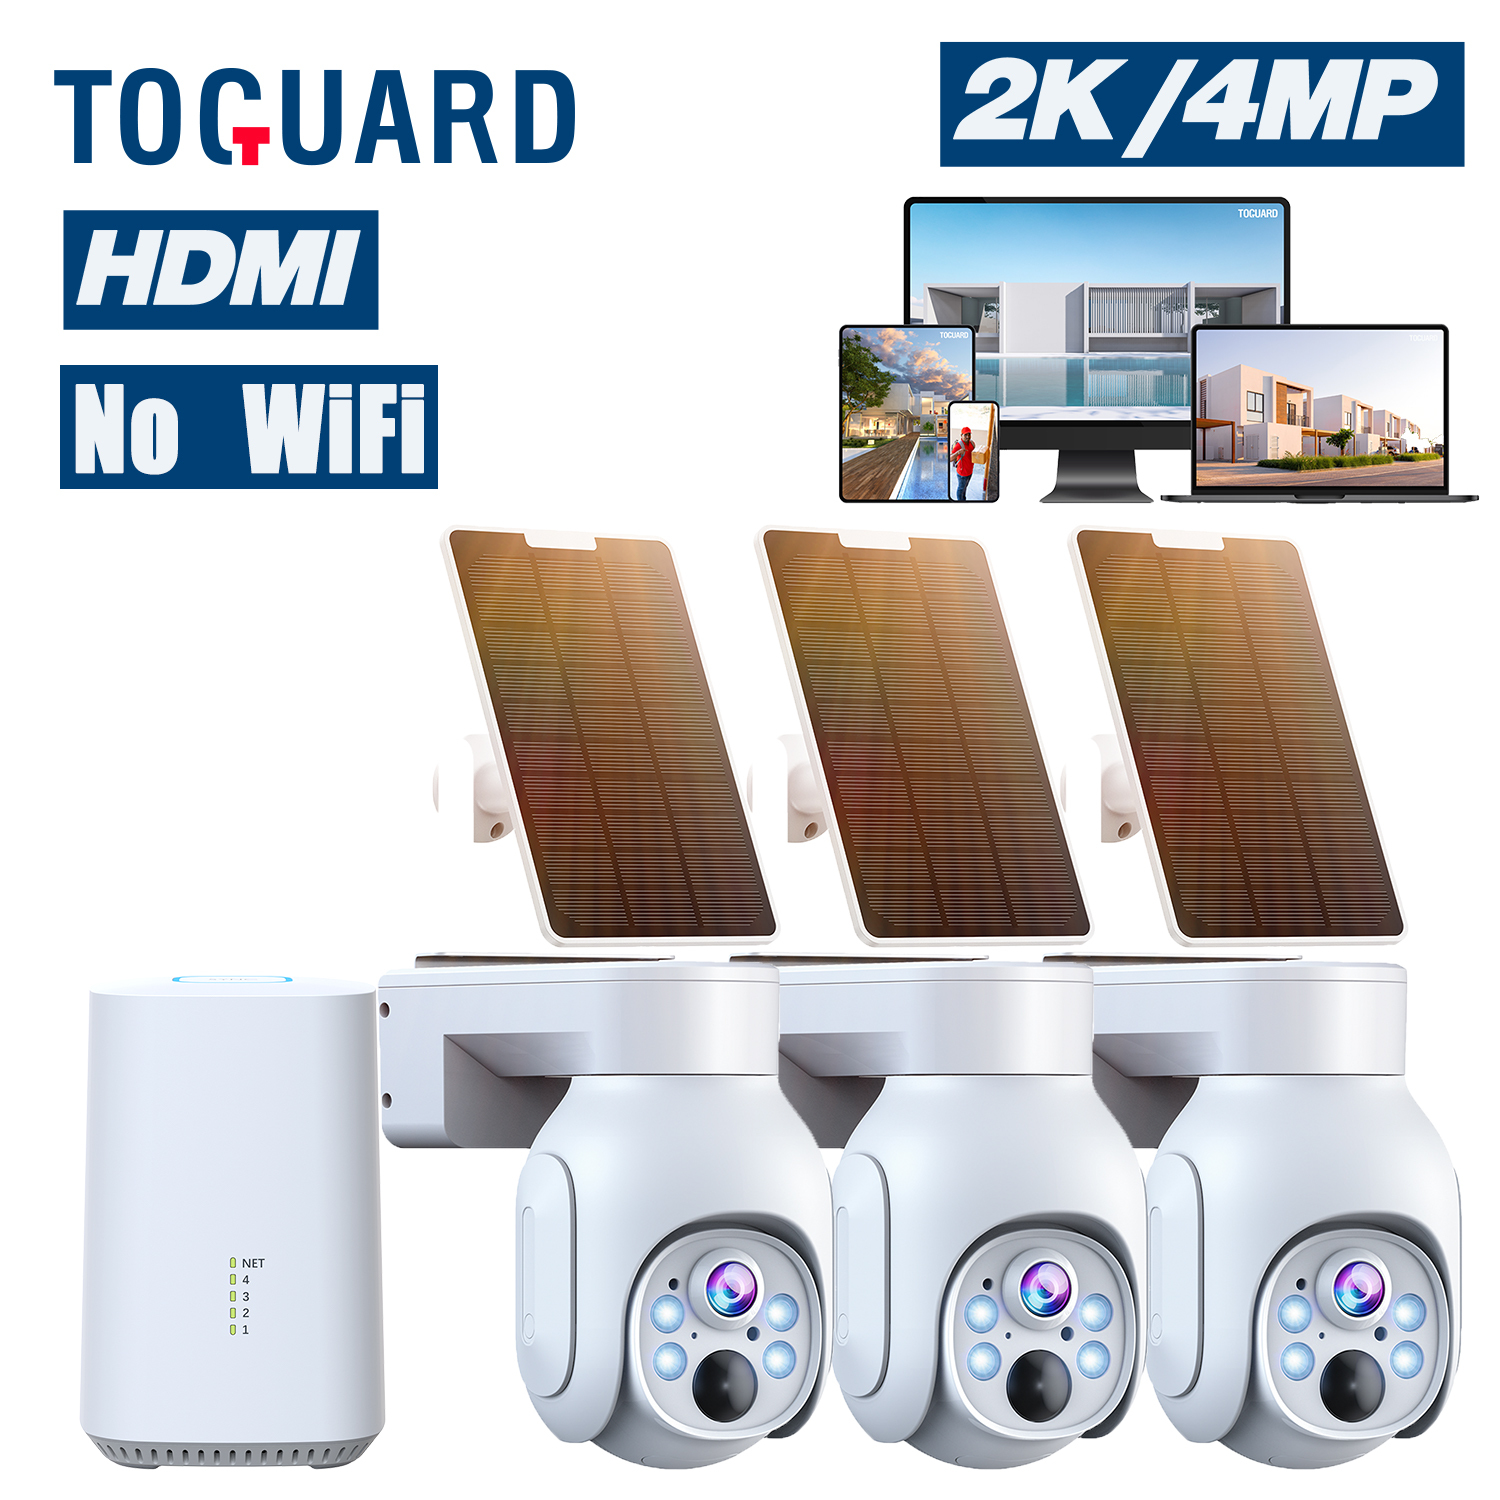 Toguard SC19A Solar Wireless Security Camera System Outdoor Battery WiFi Dome Surveillance Camera Wireless Connector - image 1 of 8